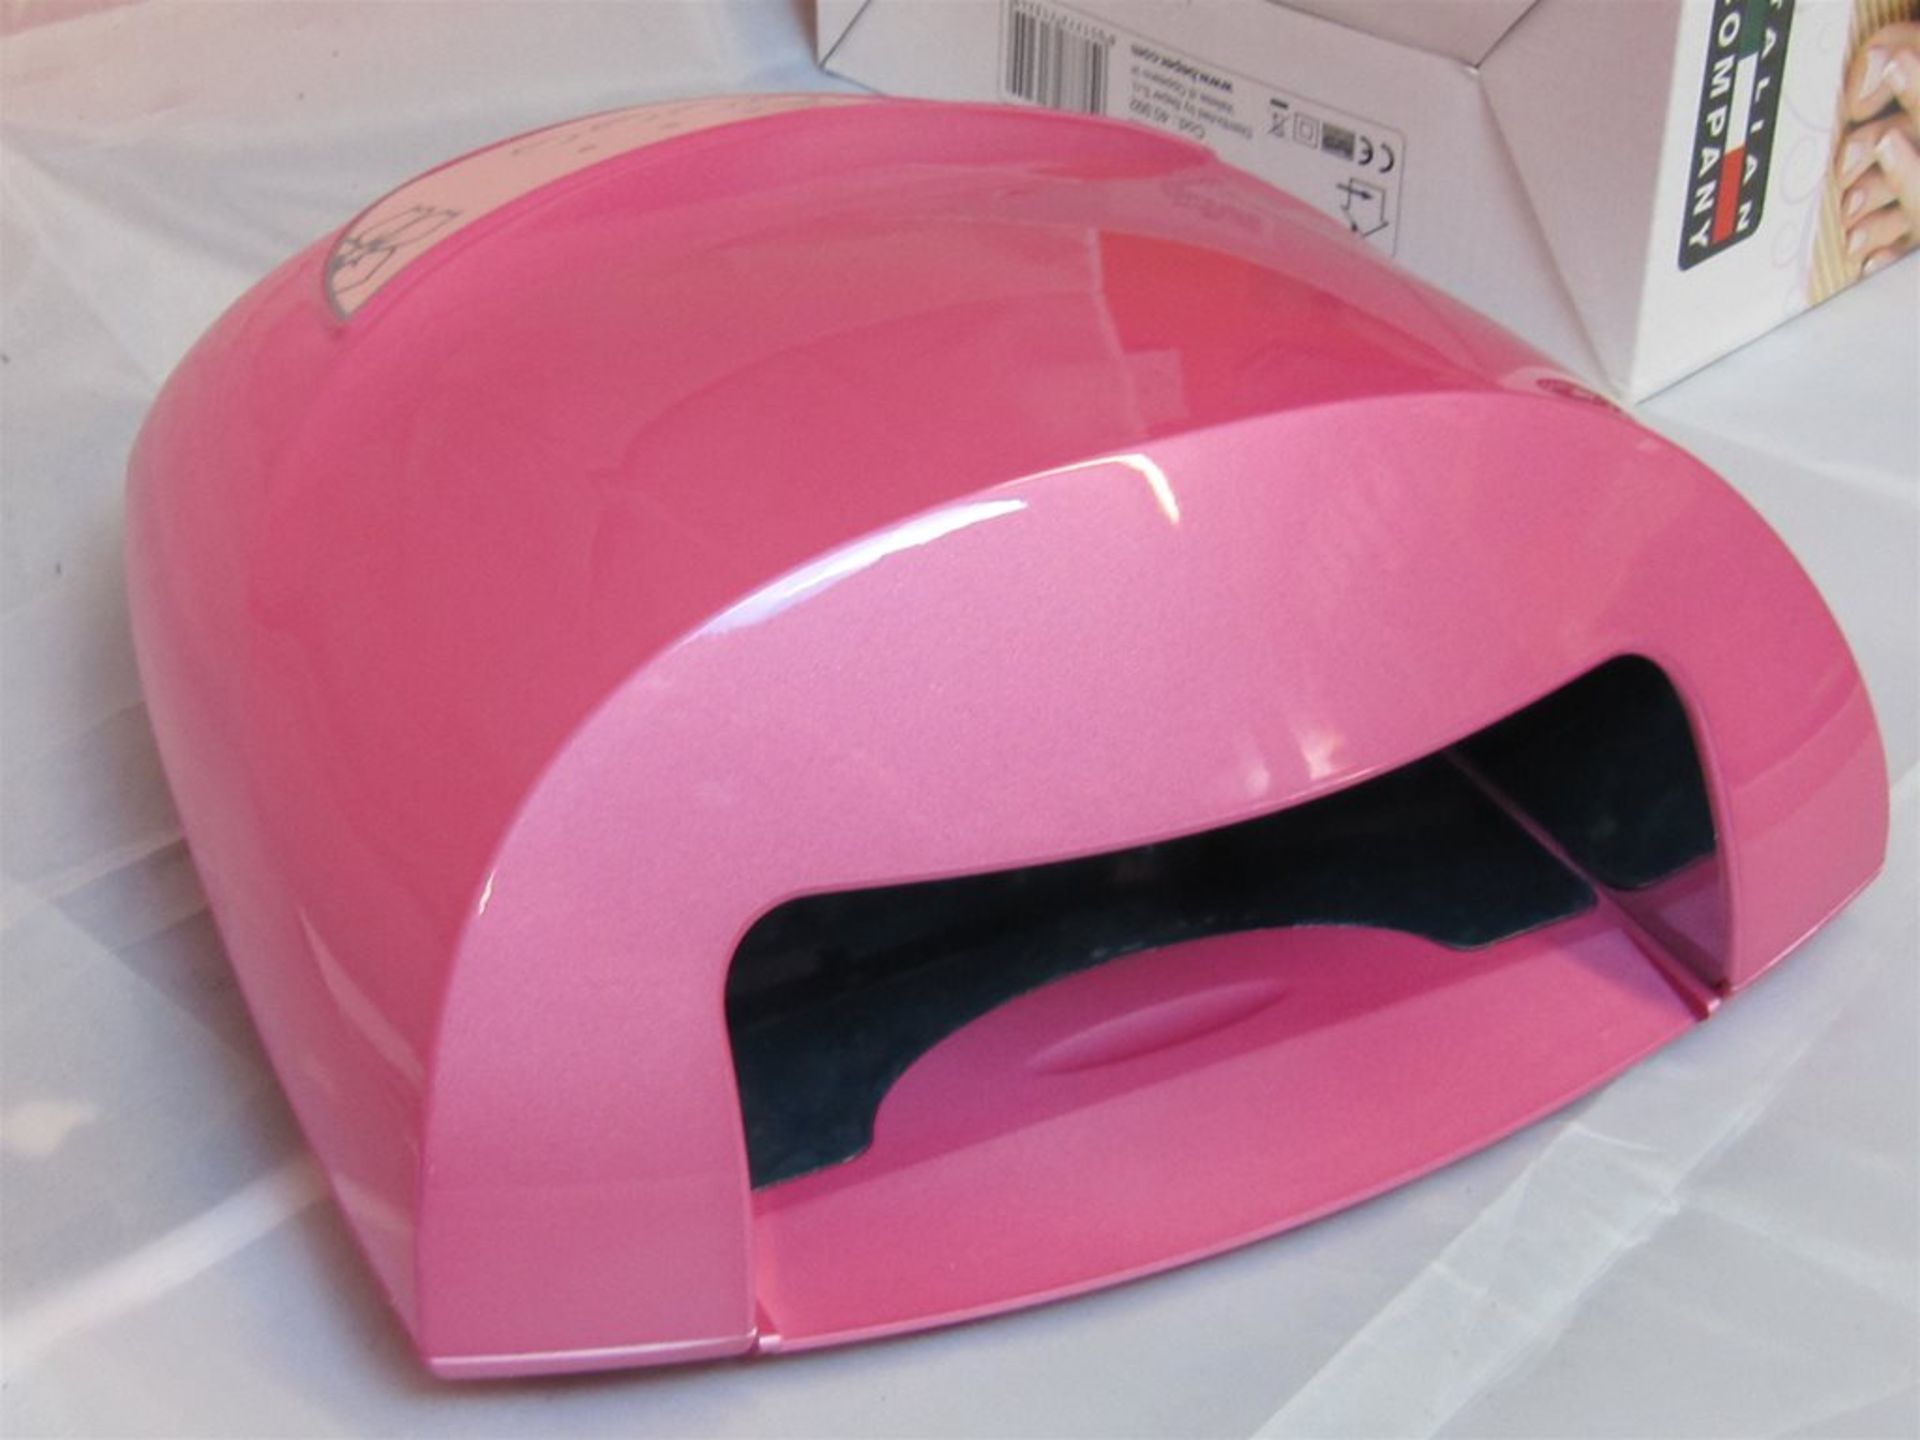 157) Beper LED Nail Lamp. 12w Rapid Dry Time. No vat on Hammer. - Image 4 of 4